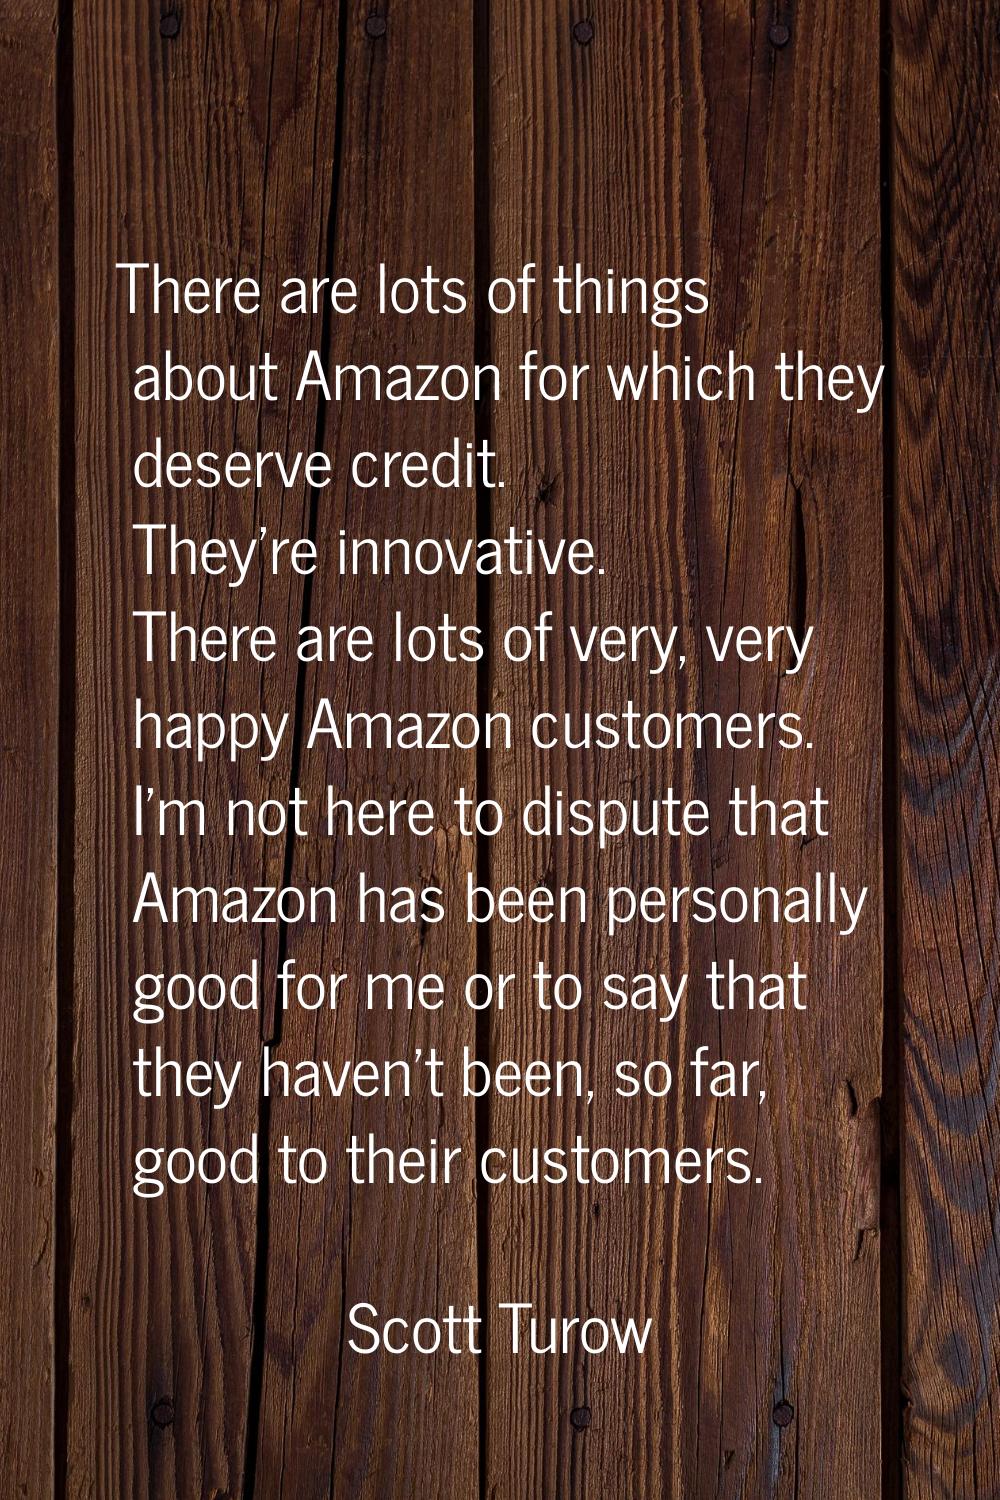 There are lots of things about Amazon for which they deserve credit. They're innovative. There are 